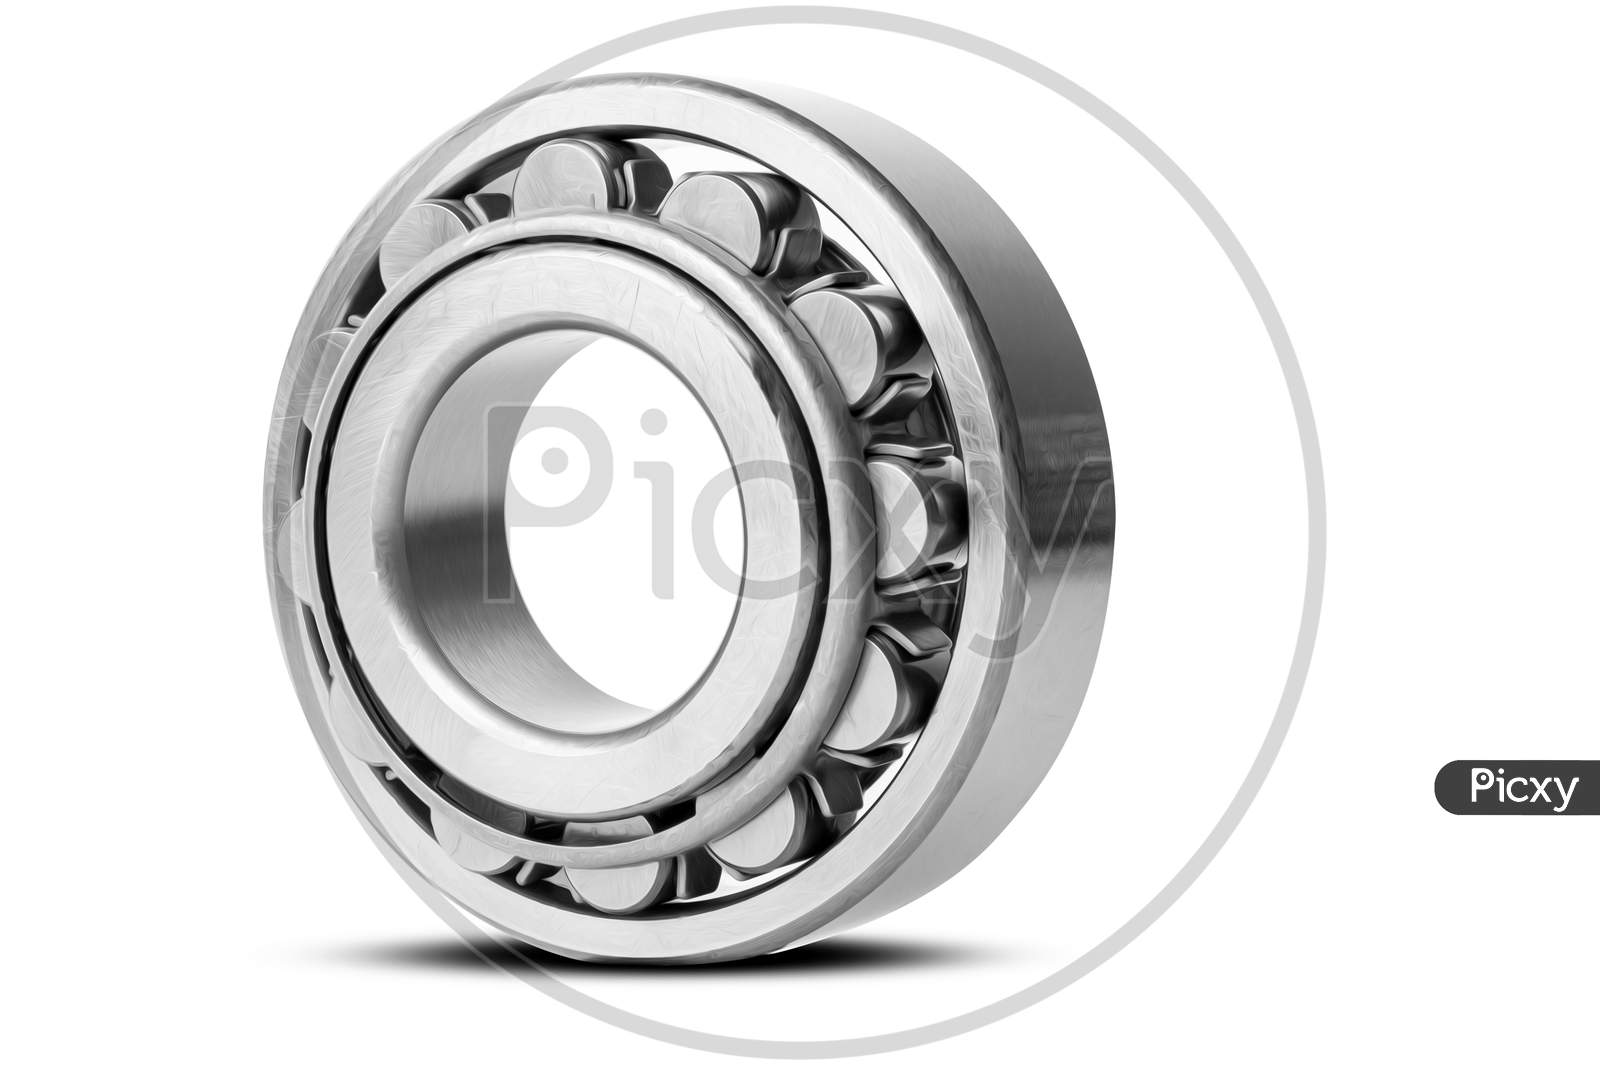 Metal Silver Ball Bearing With Balls On White  Isolated Background. Bearing Industrial. This Part Of The Car